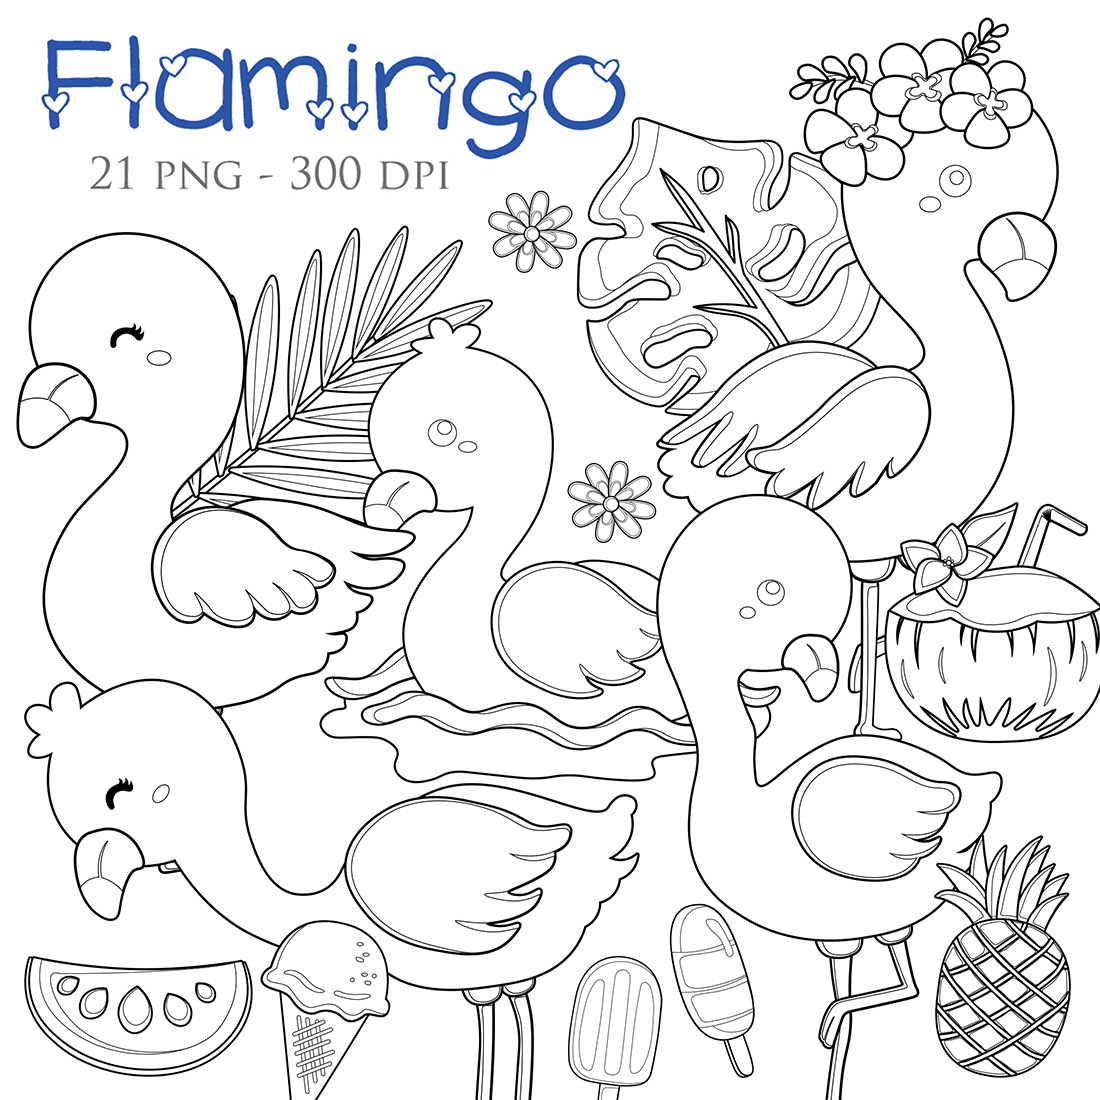 Funny Flamingo Bird Animal and Summer Fruits Coconut Pineapple Nature Holiday Digital Stamp Outline cover image.